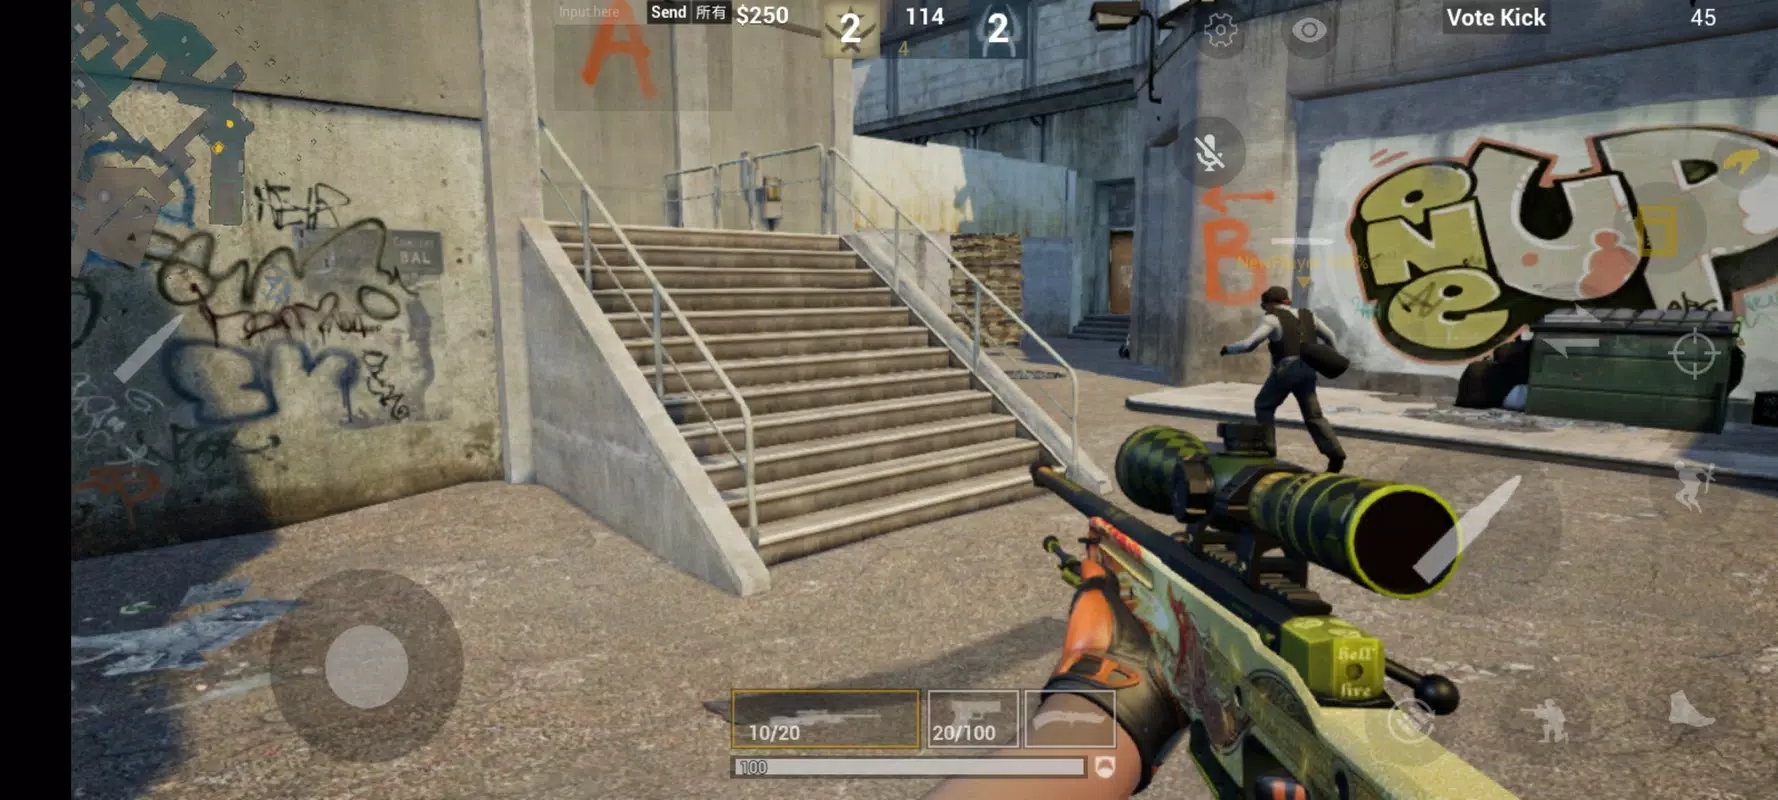 Download CSGO Mobile 3.8 APK for android free